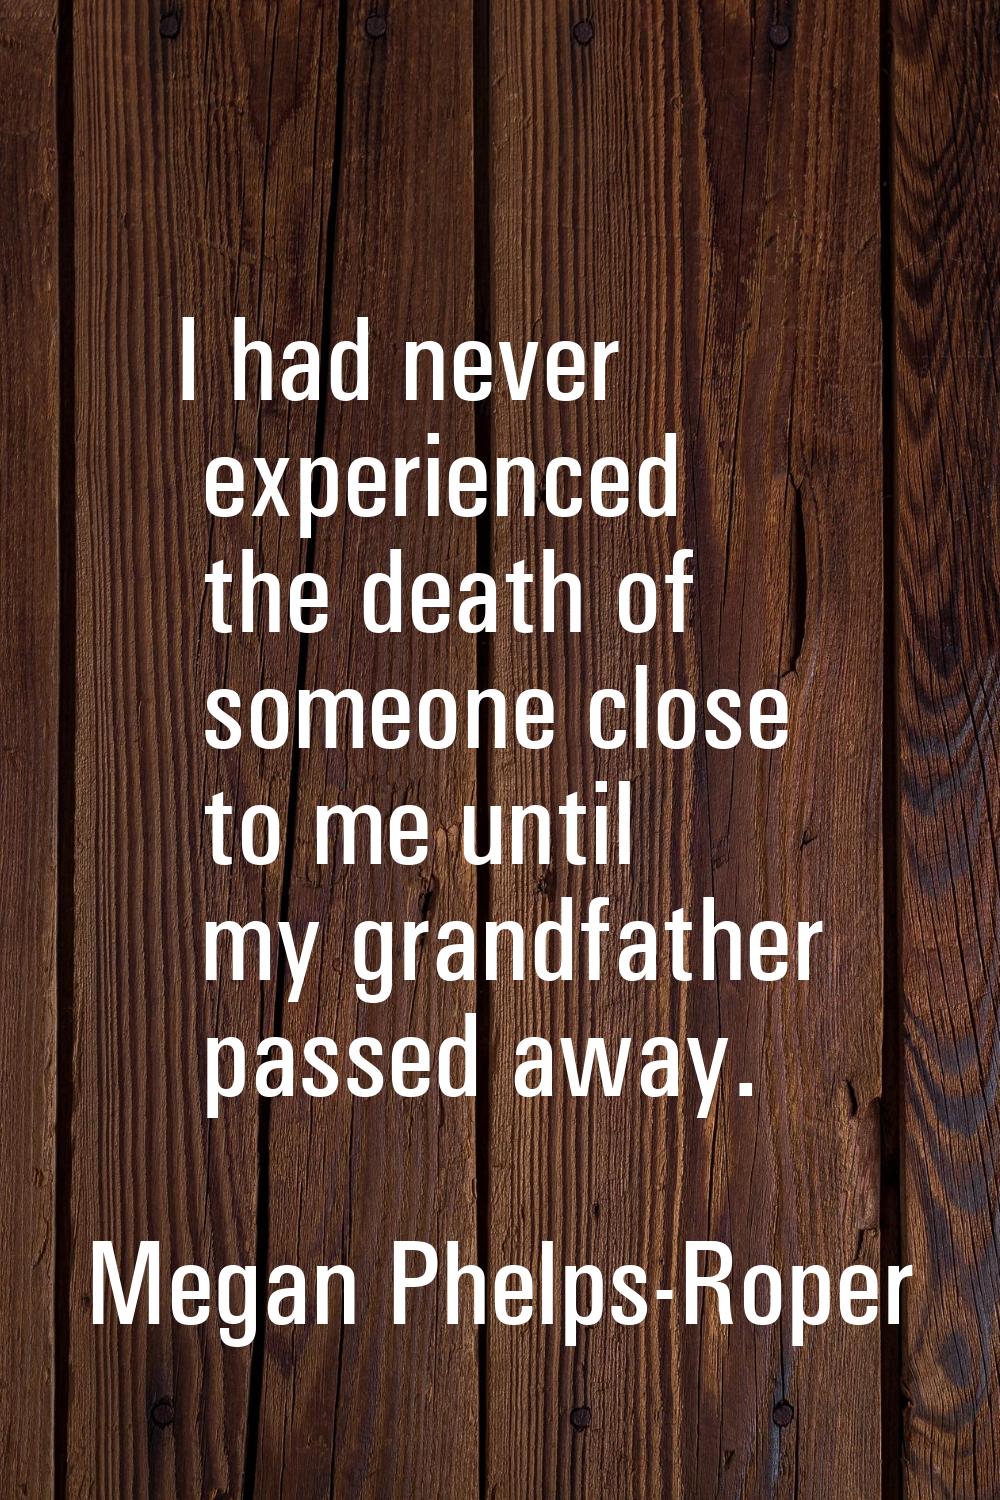 I had never experienced the death of someone close to me until my grandfather passed away.